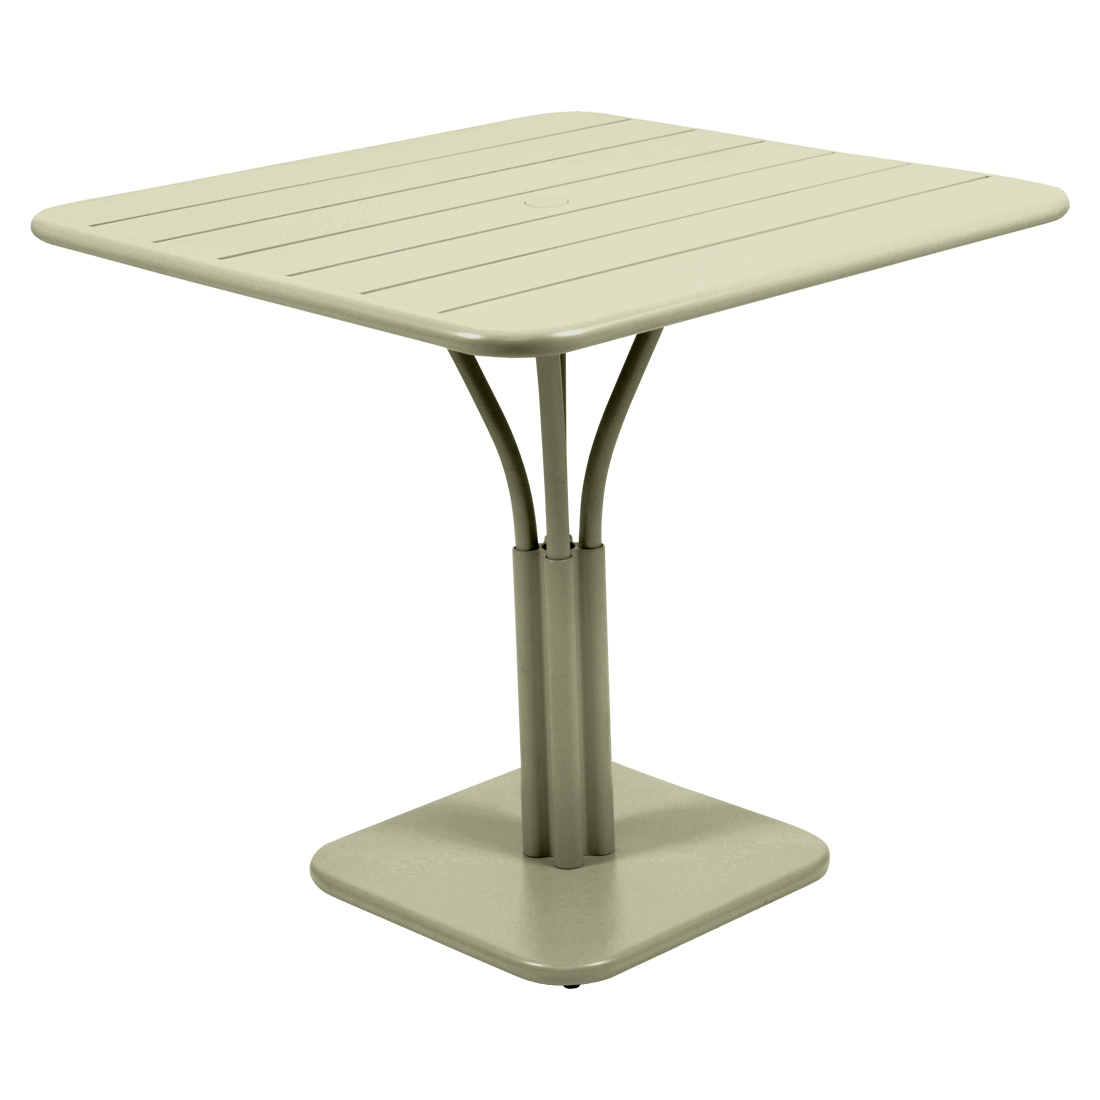 Luxembourg Pedestal Table 80x80 timeoutspace.com